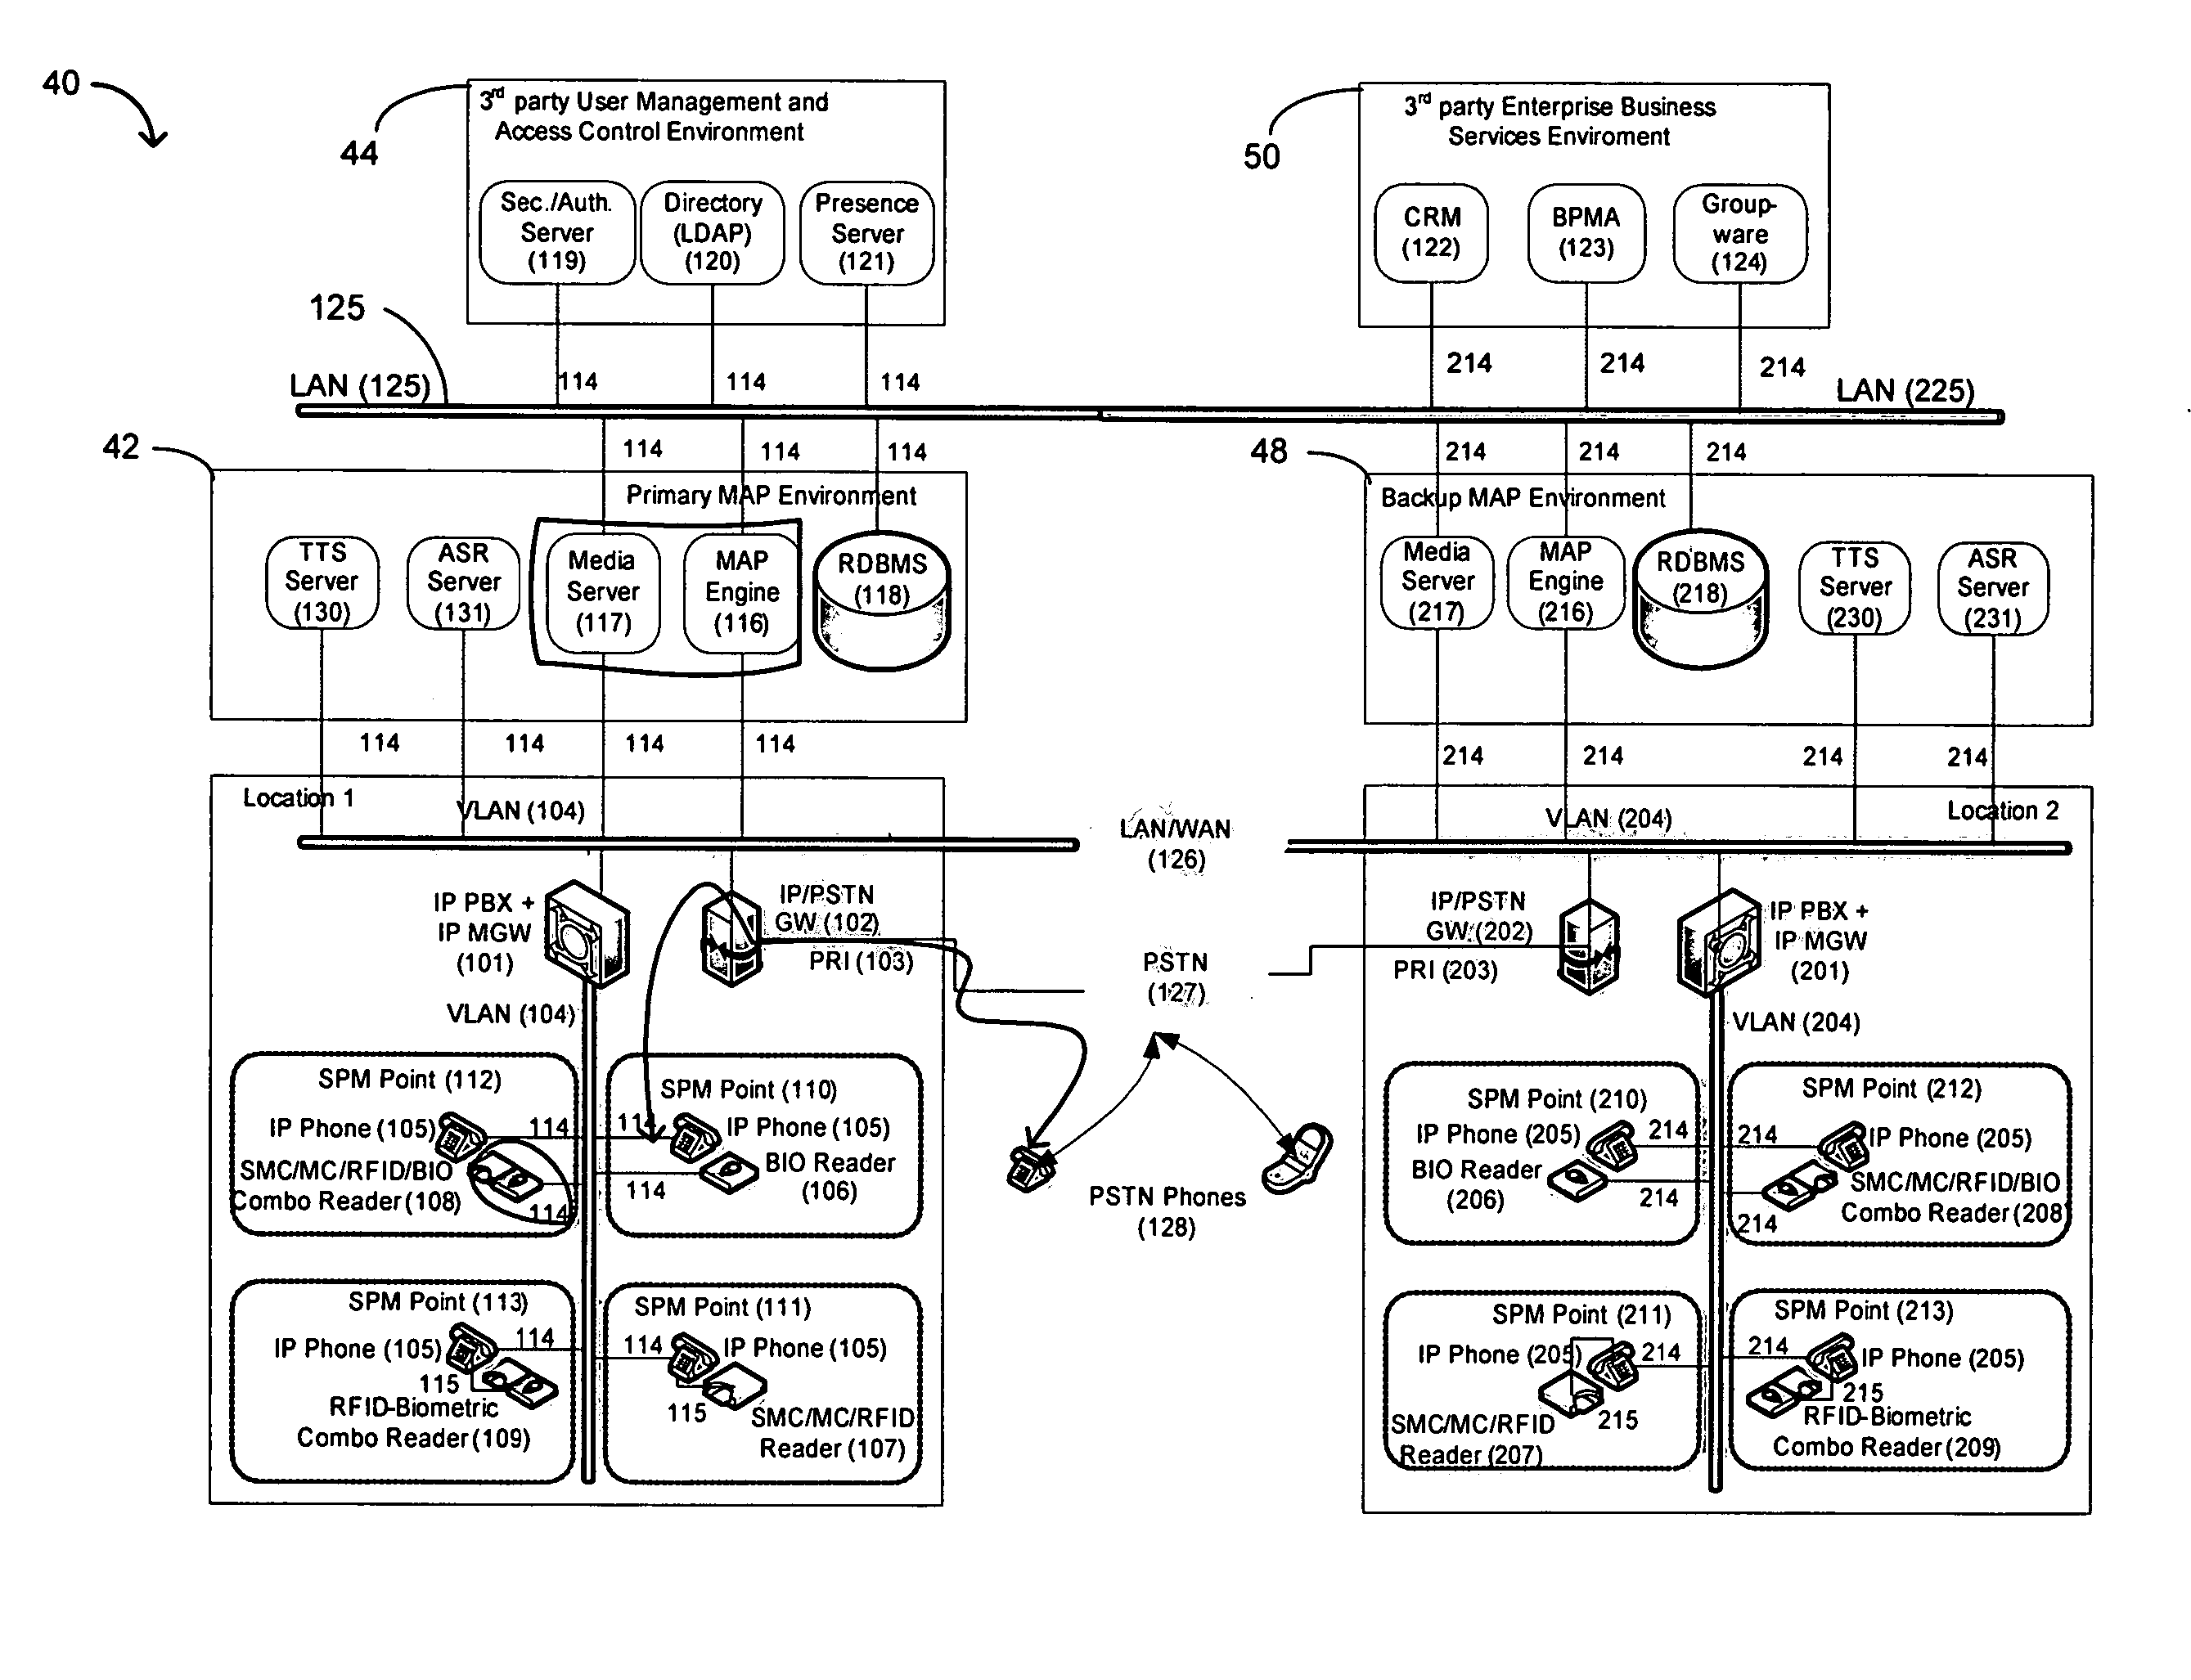 Method and system for multi-level secure personal profile management and access control to the enterprise multi-modal communication environment in heterogeneous convergent communication networks